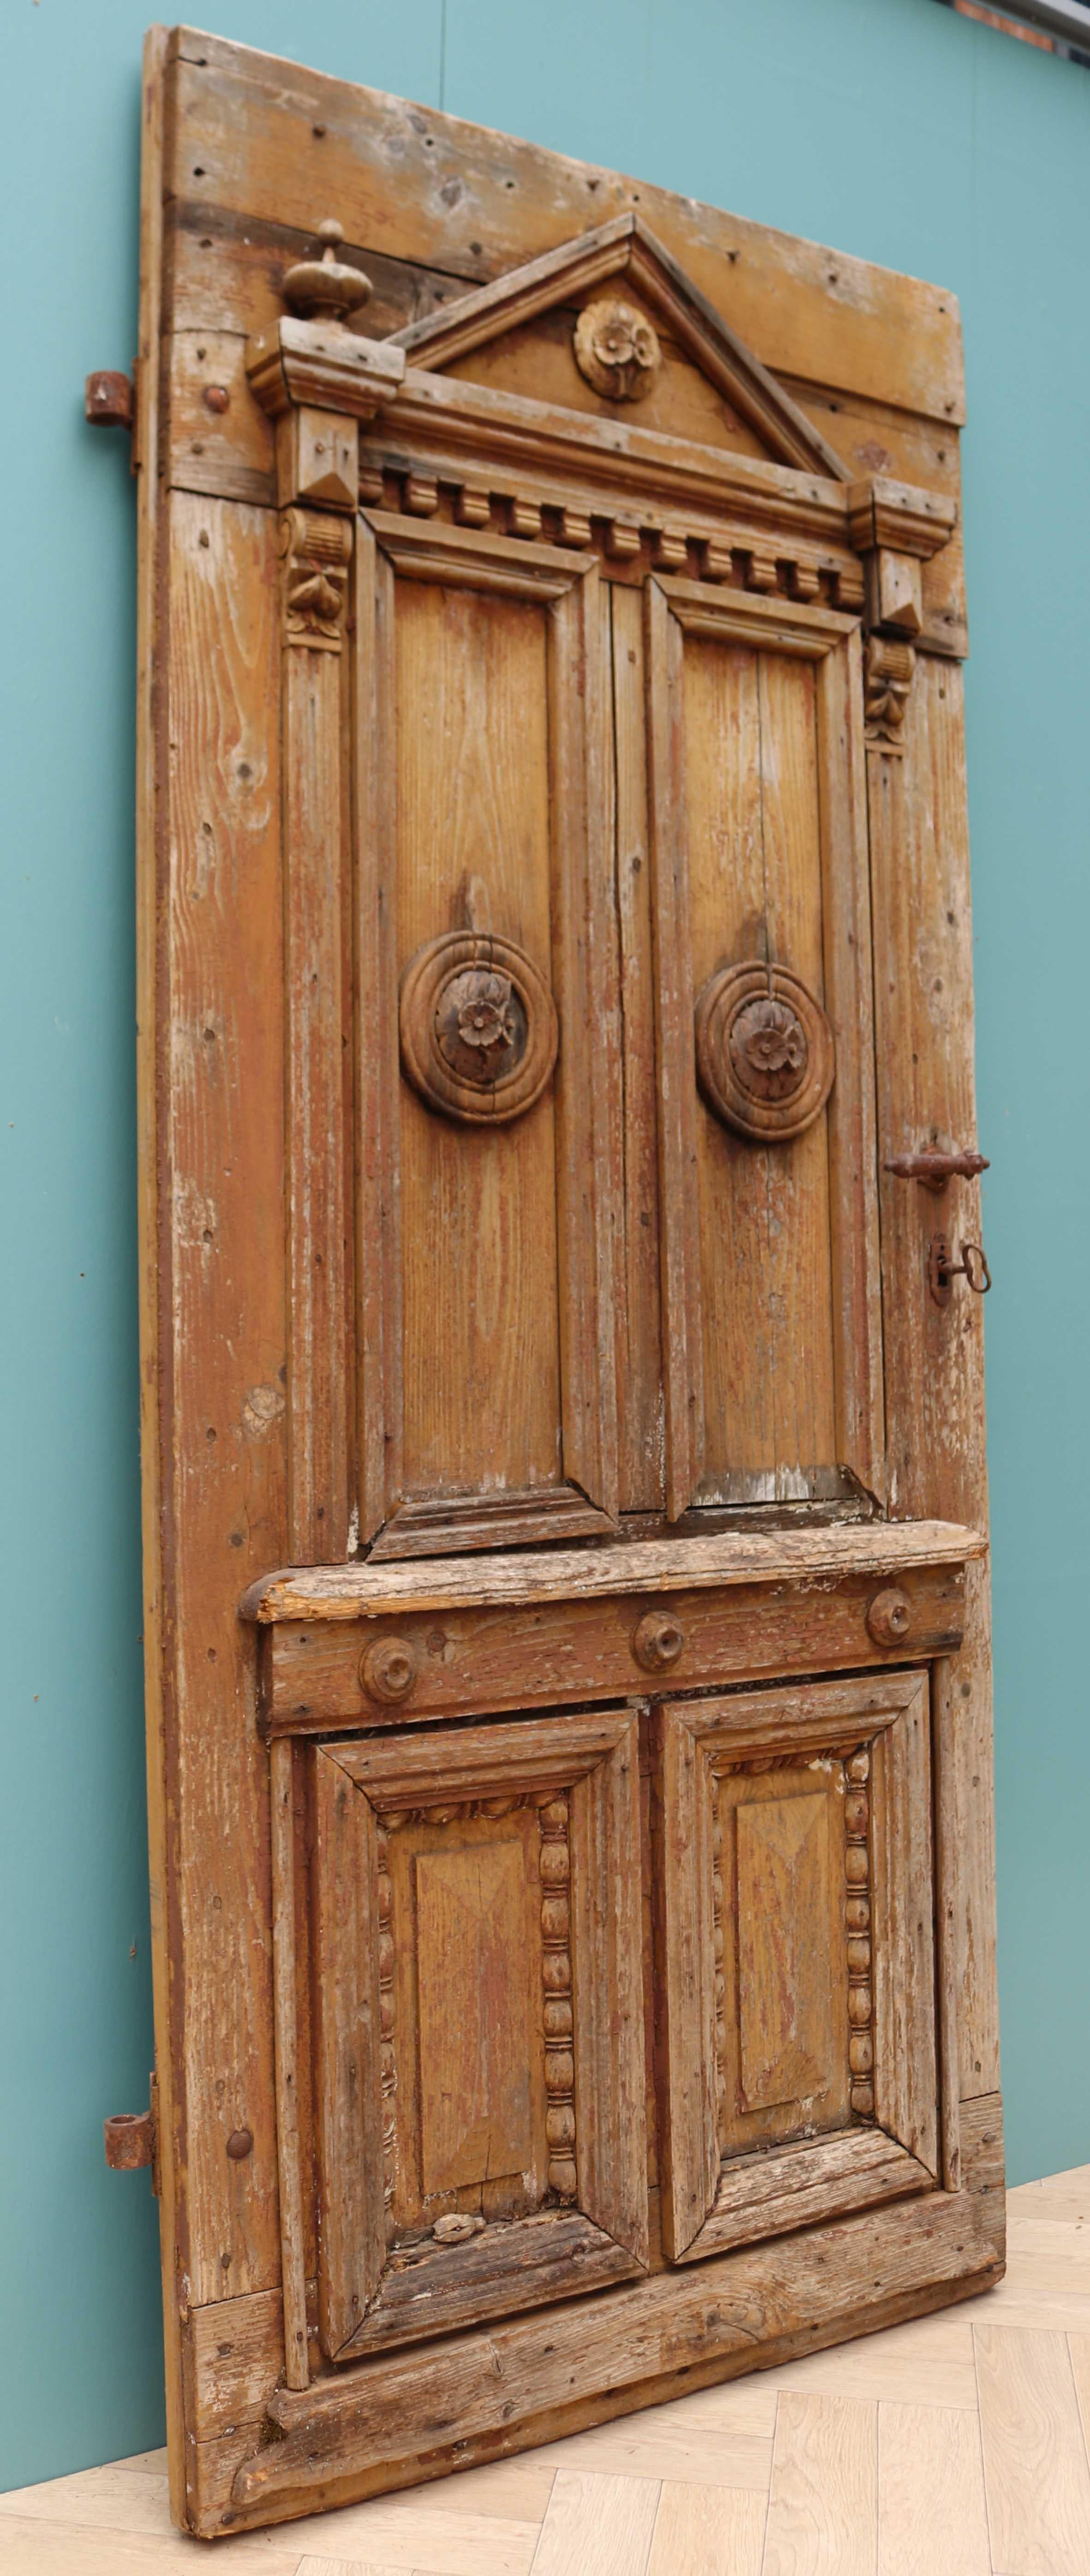 An unusual exterior door constructed from pine, with applied carvings.